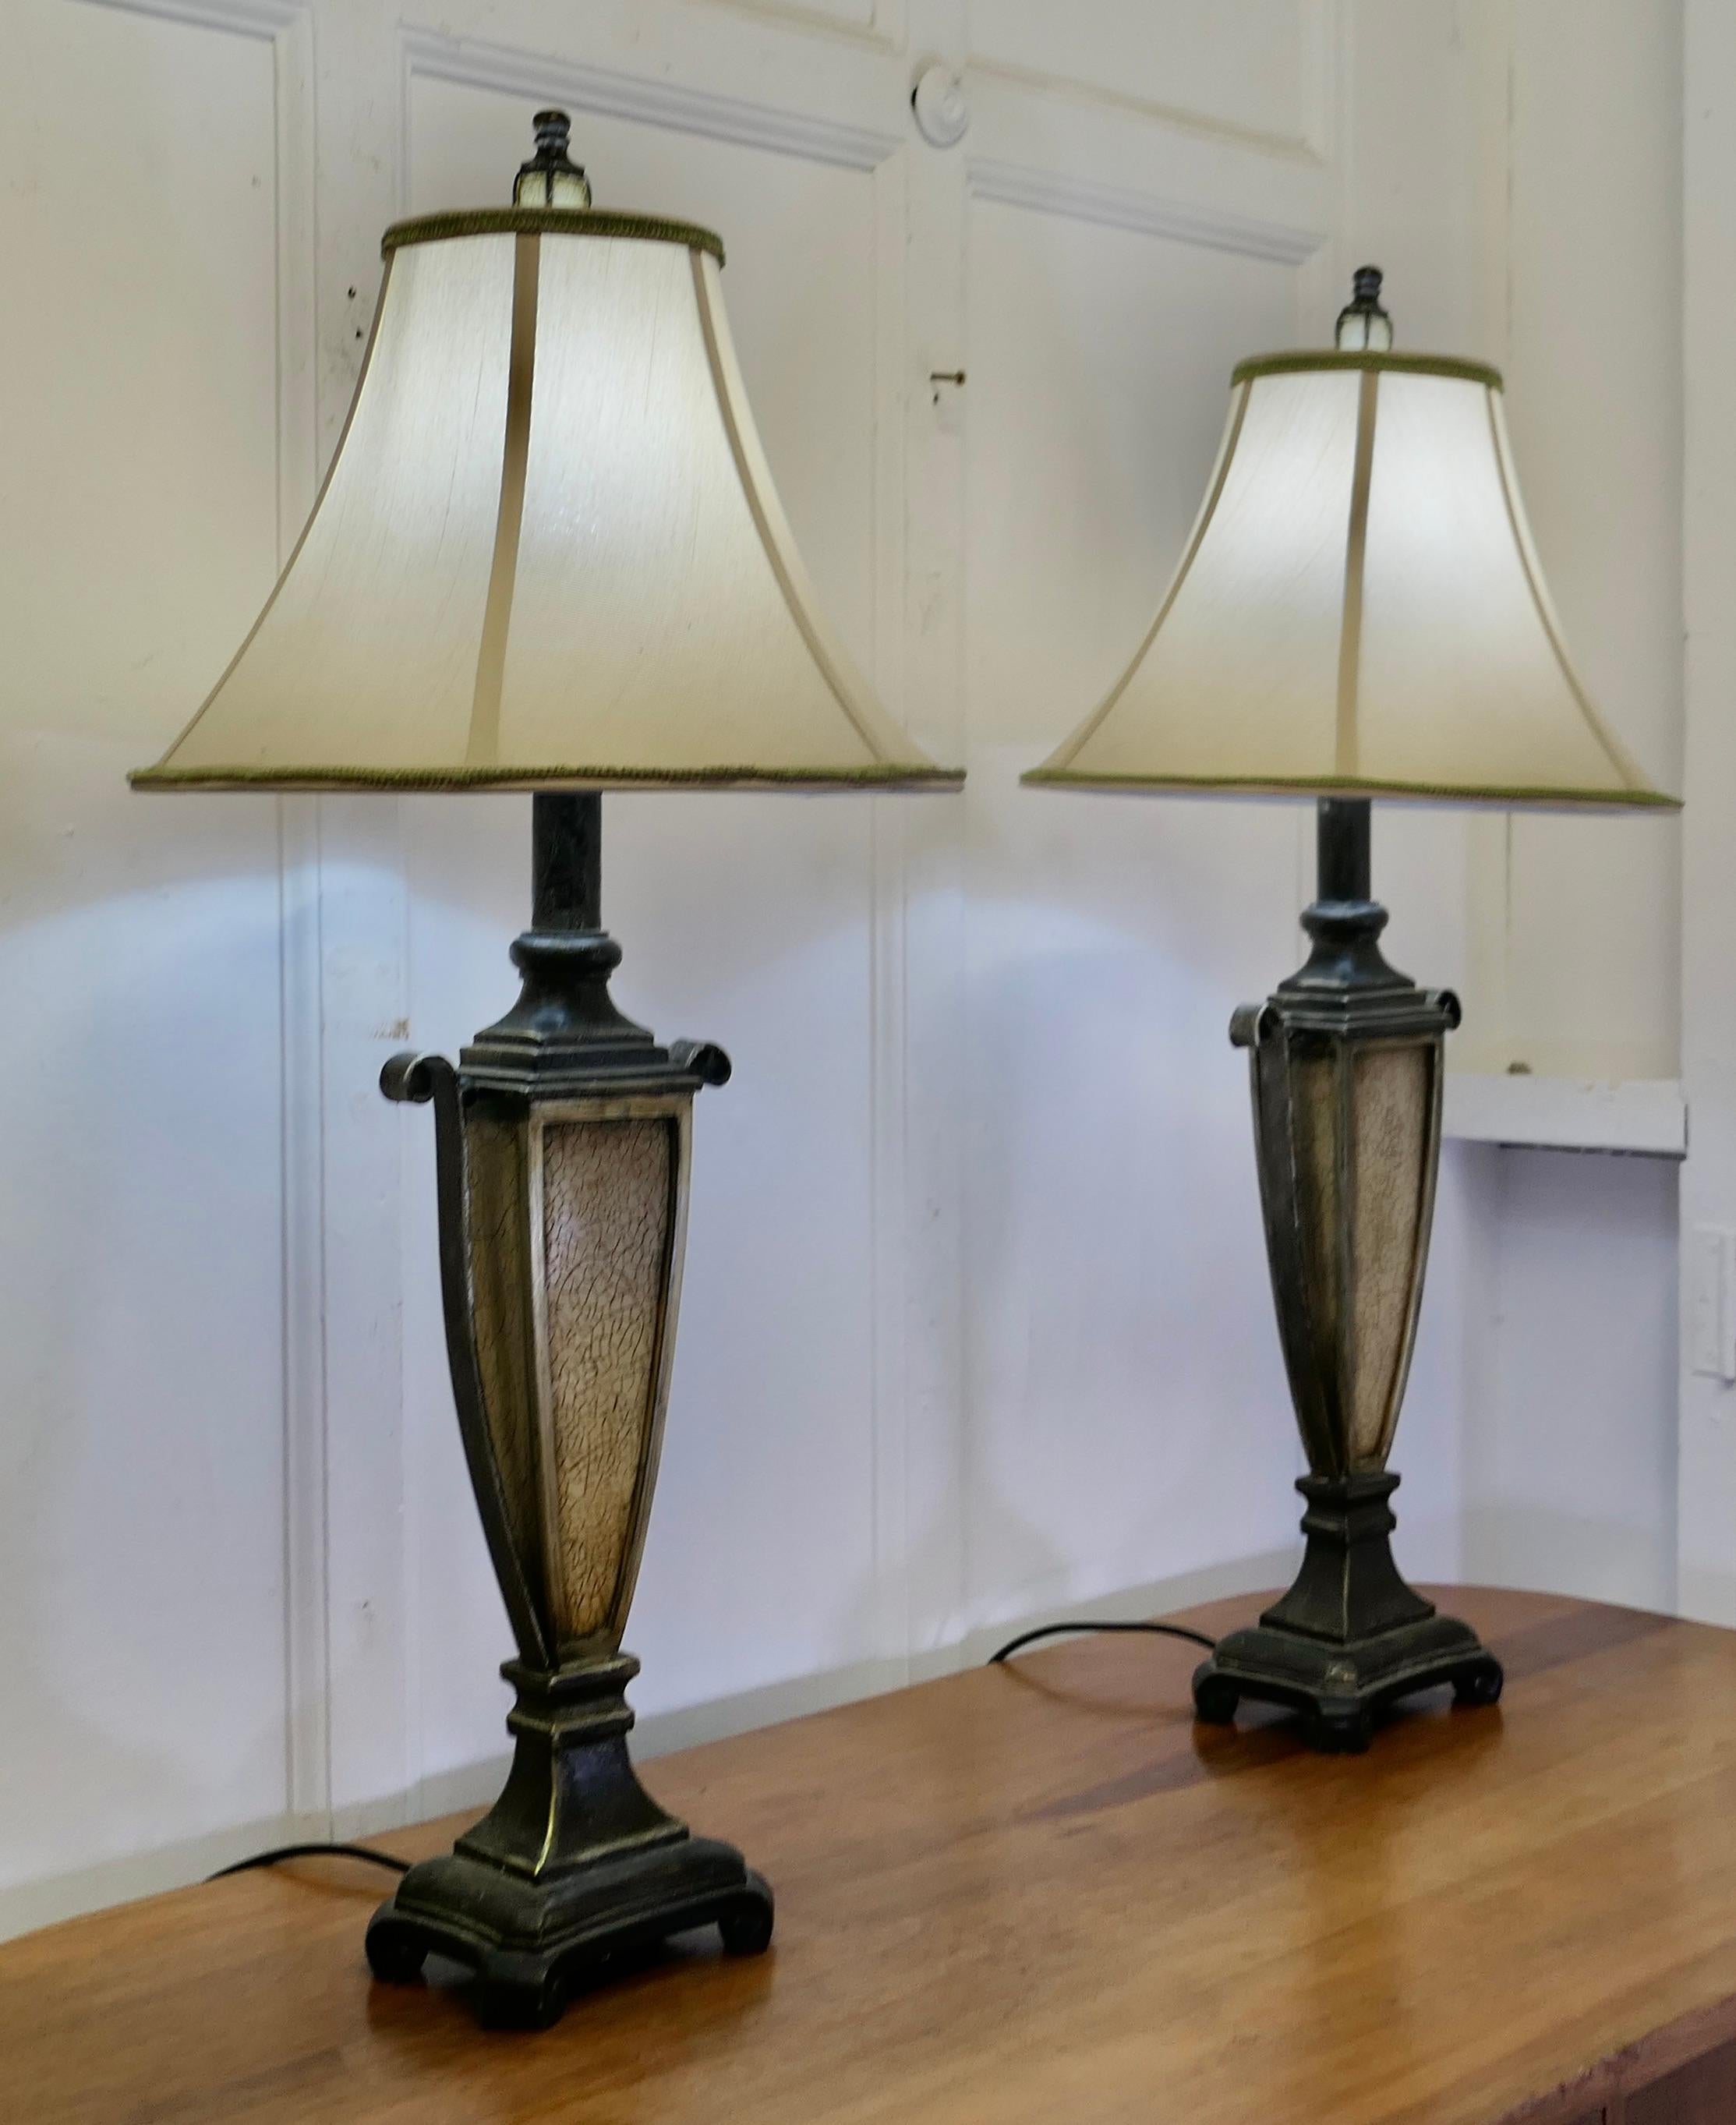 Mid-20th Century Pair of Decorative Art Deco Style Table Lamps   An exciting pair of lamp For Sale